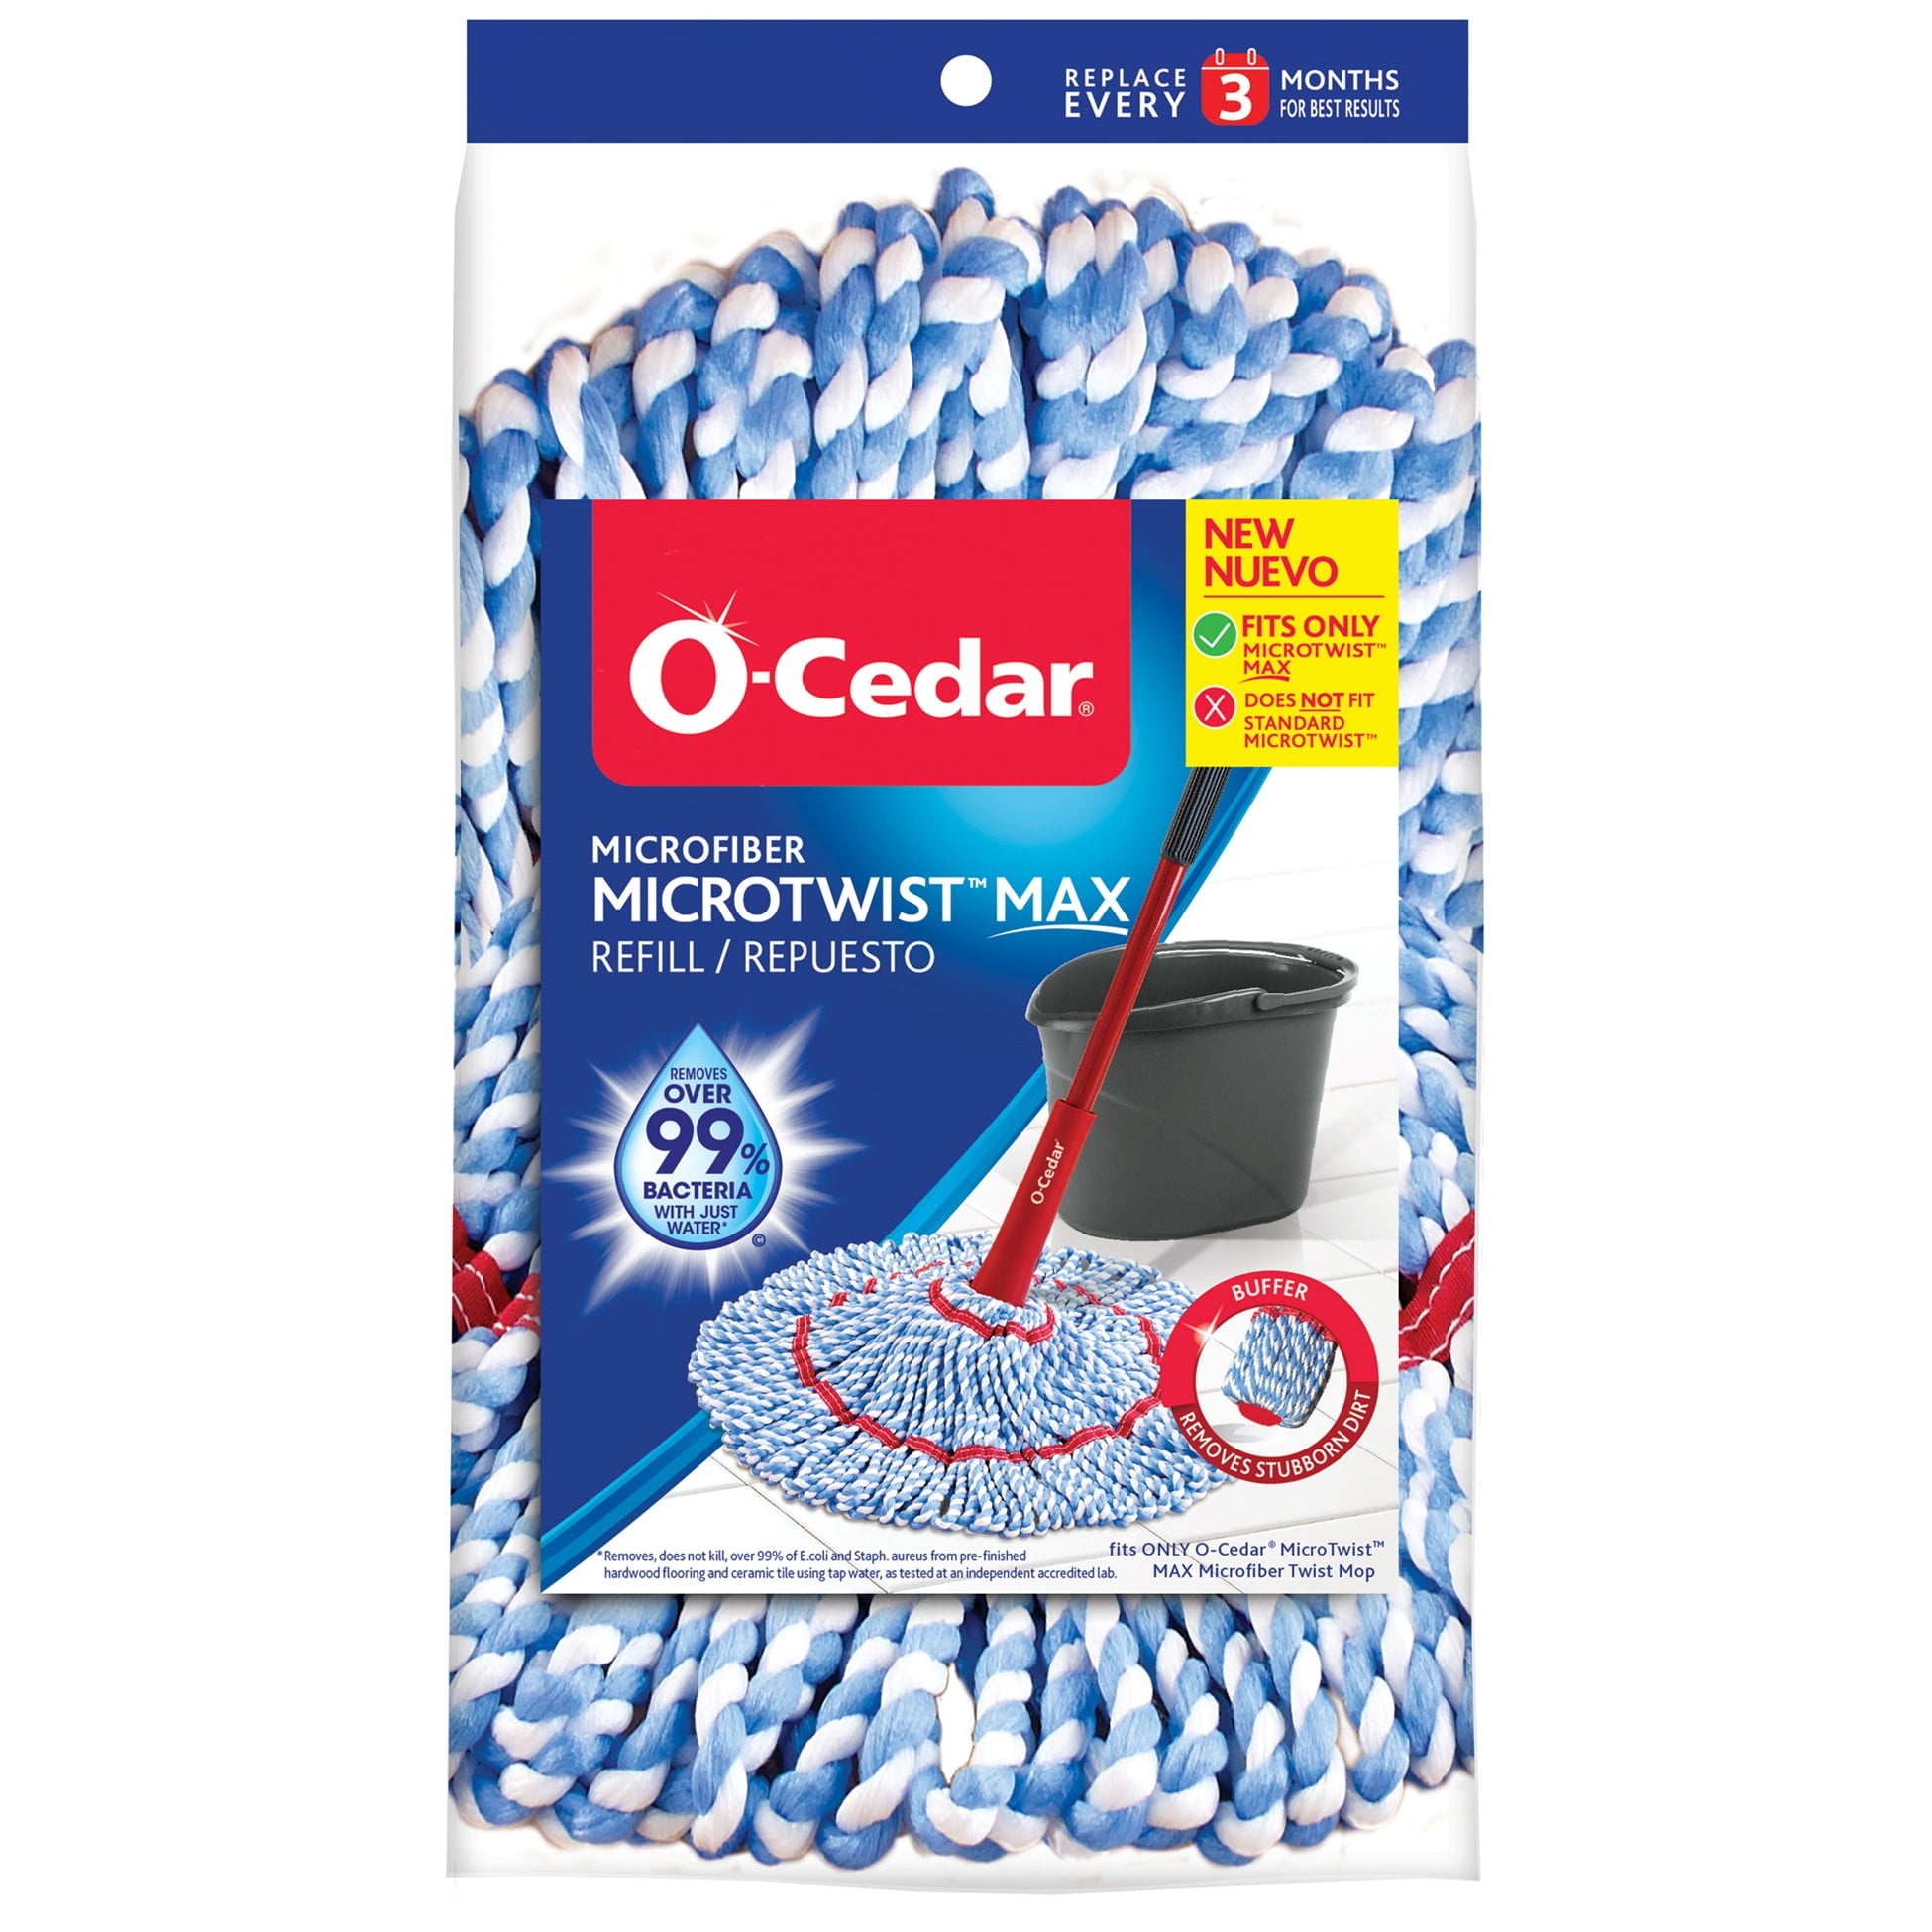 O-Cedar MicroTwist MAX Microfiber Mop Refill, Removes 99% of Bacteria with Just Water